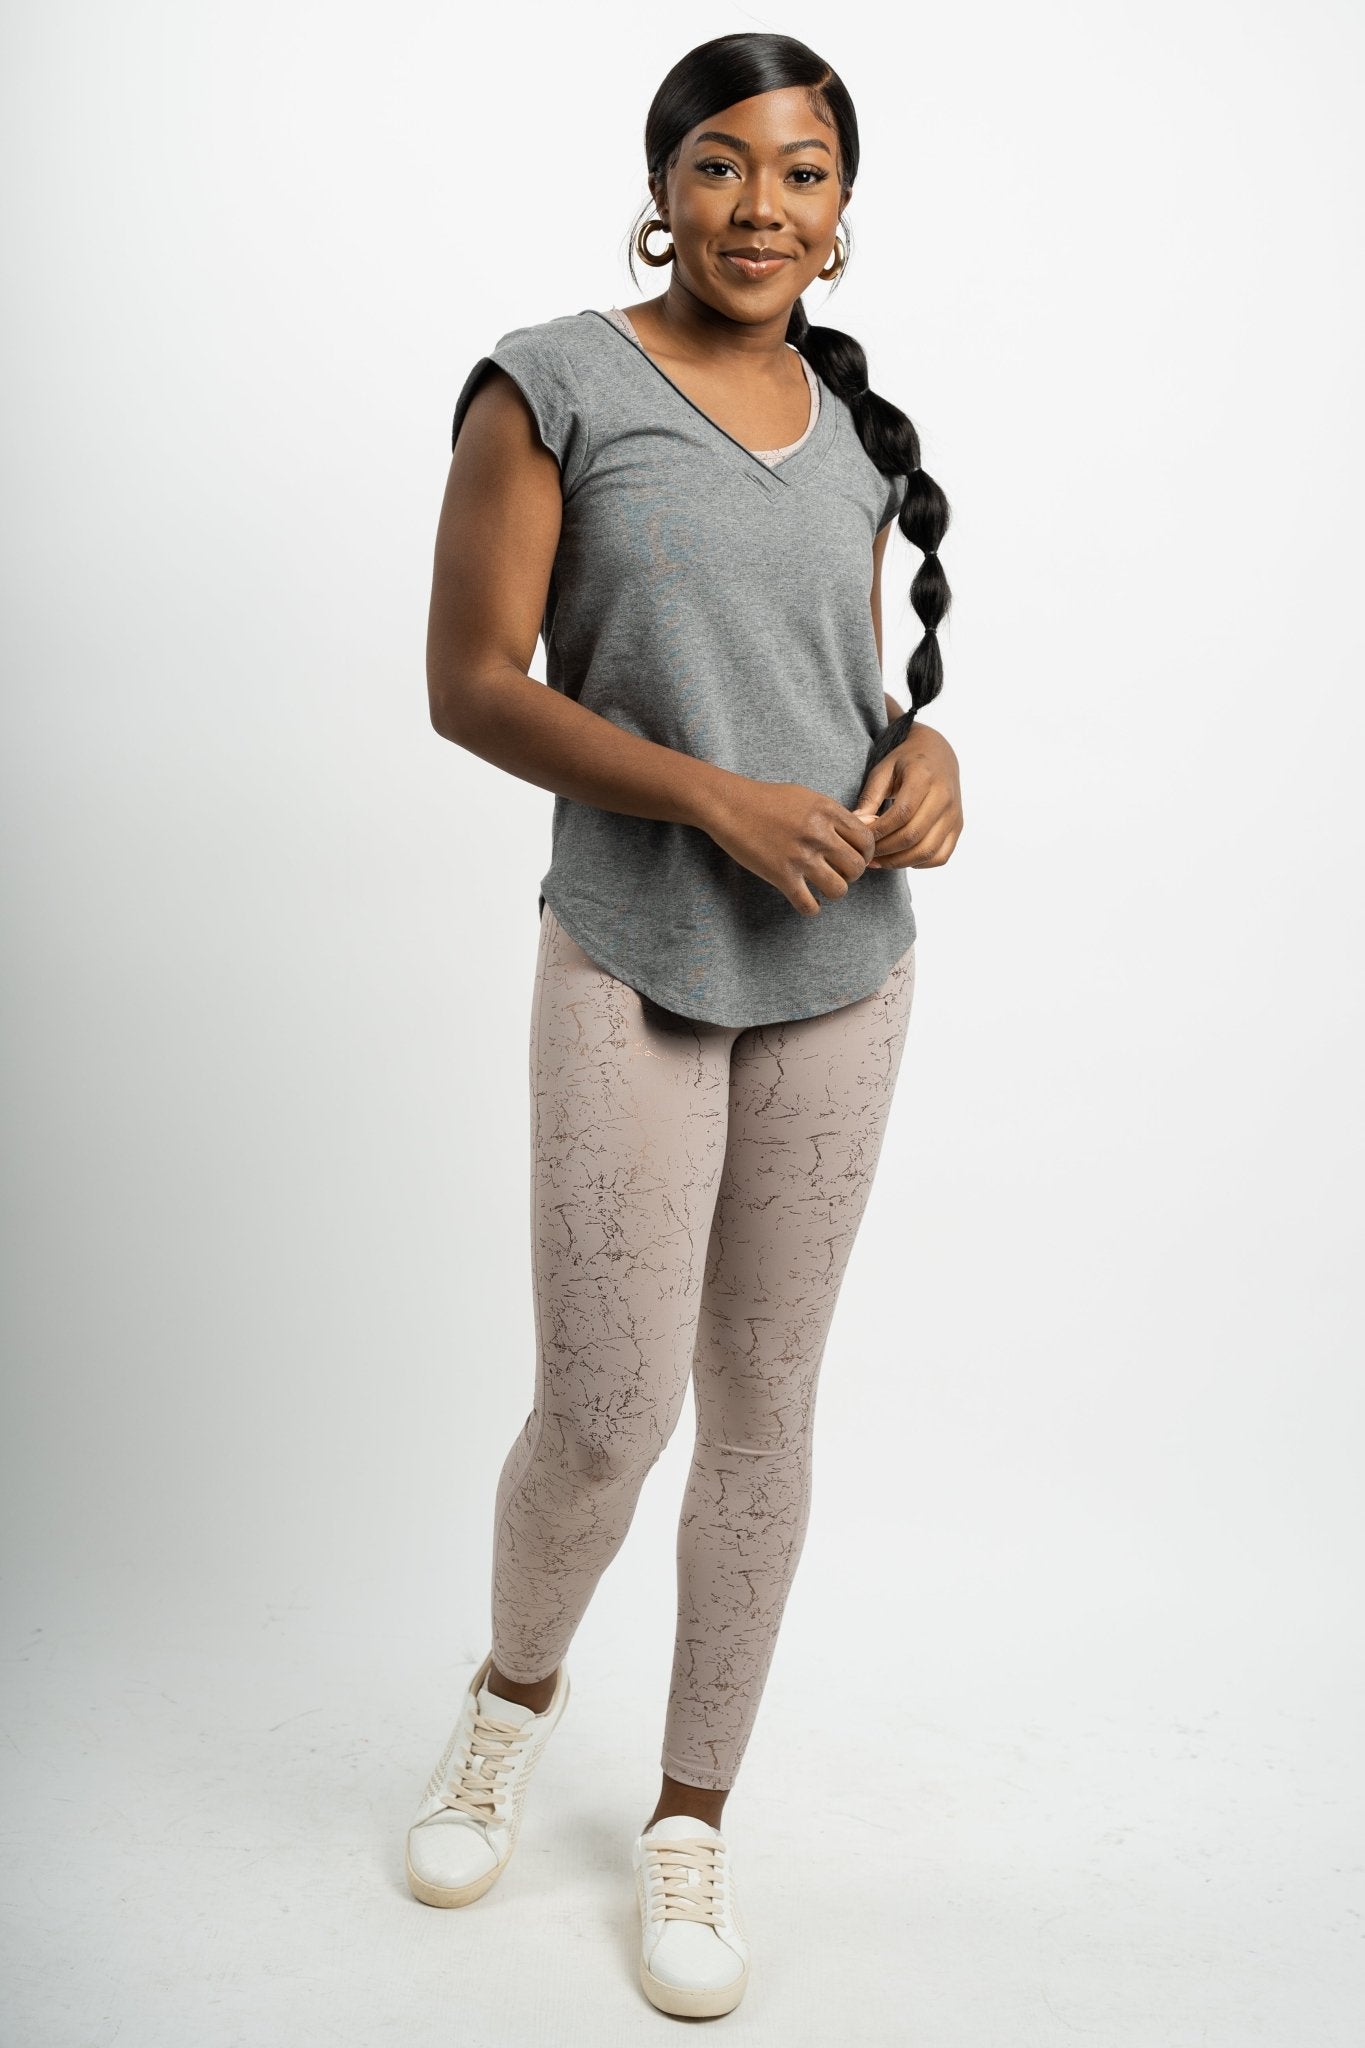 V tee with curved hem heather grey - Trendy Sports tops - Fashion Activewear at Lush Fashion Lounge Boutique in Oklahoma City